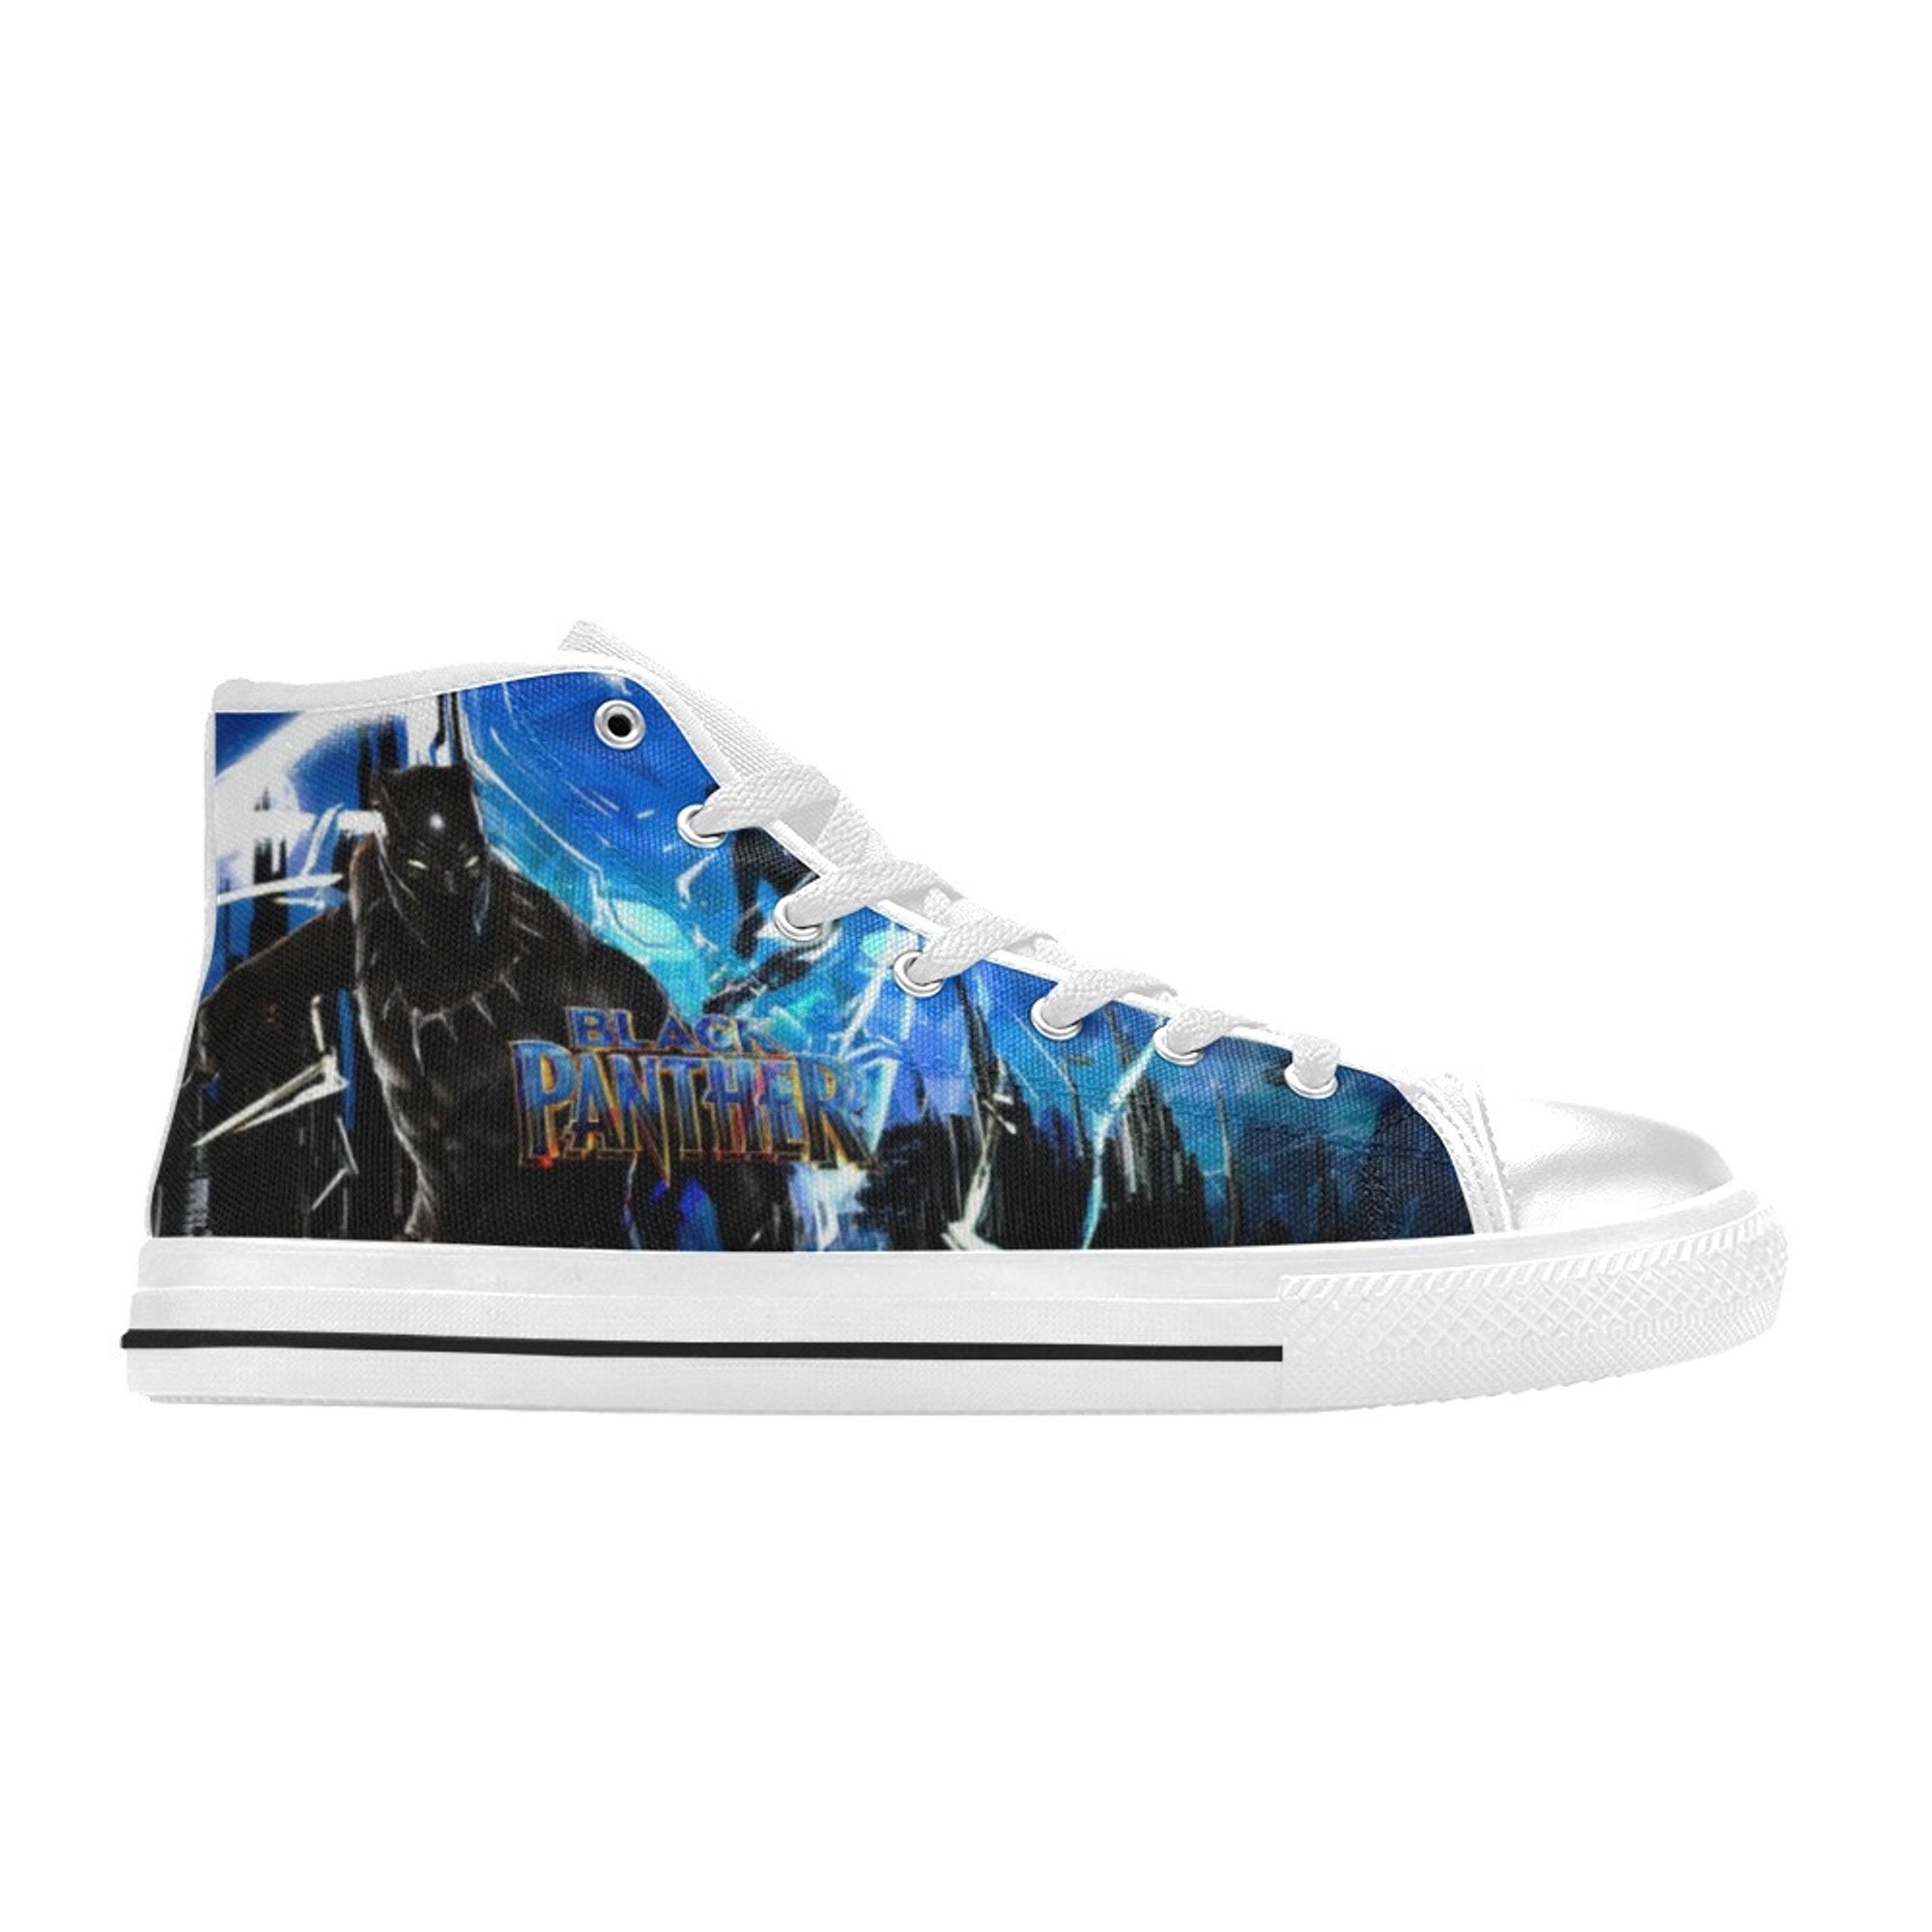 The Black Panther Wakanda Forever themed custom shoes sneakers for fan adults kids women men